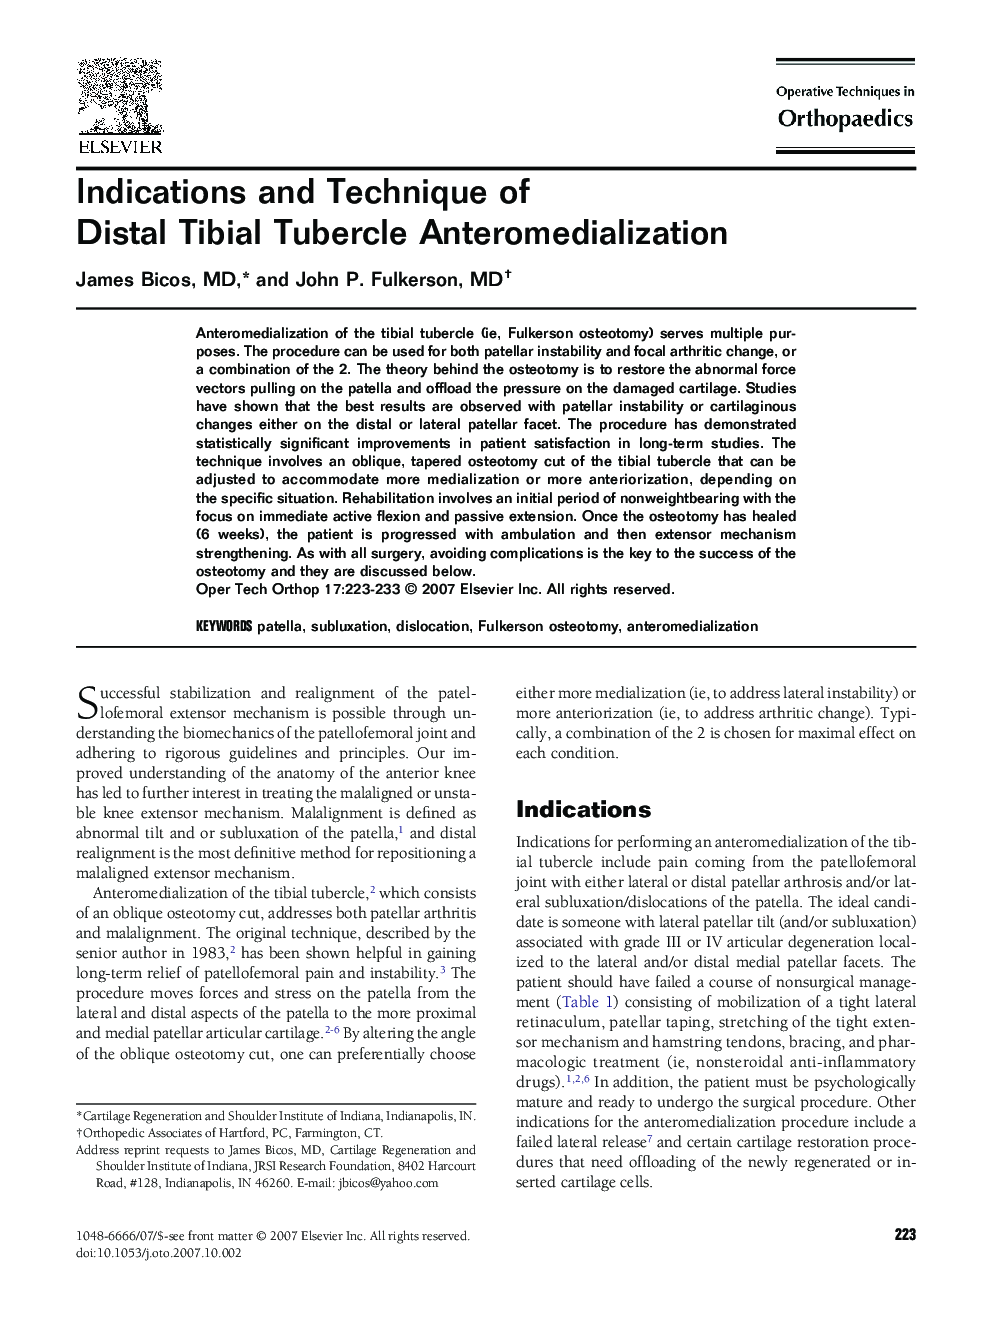 Indications and Technique of Distal Tibial Tubercle Anteromedialization